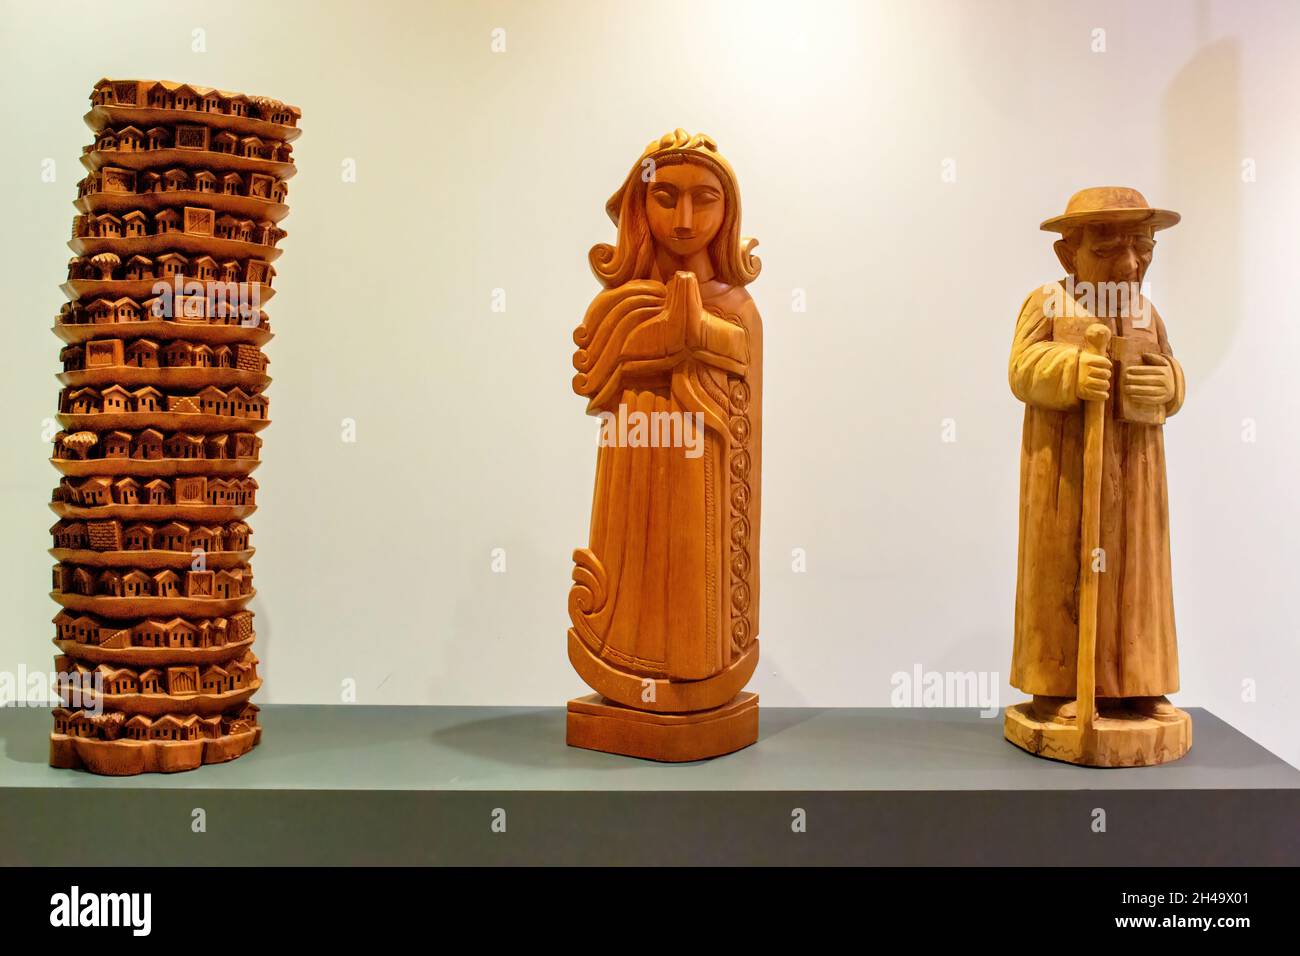 Wood artisanal objects exhibited in the CRAB - SEBRAE Center of Reference for Brazilian Handicraft in Rio de Janeiro, Brazil. Oct. 31, 2021 Stock Photo